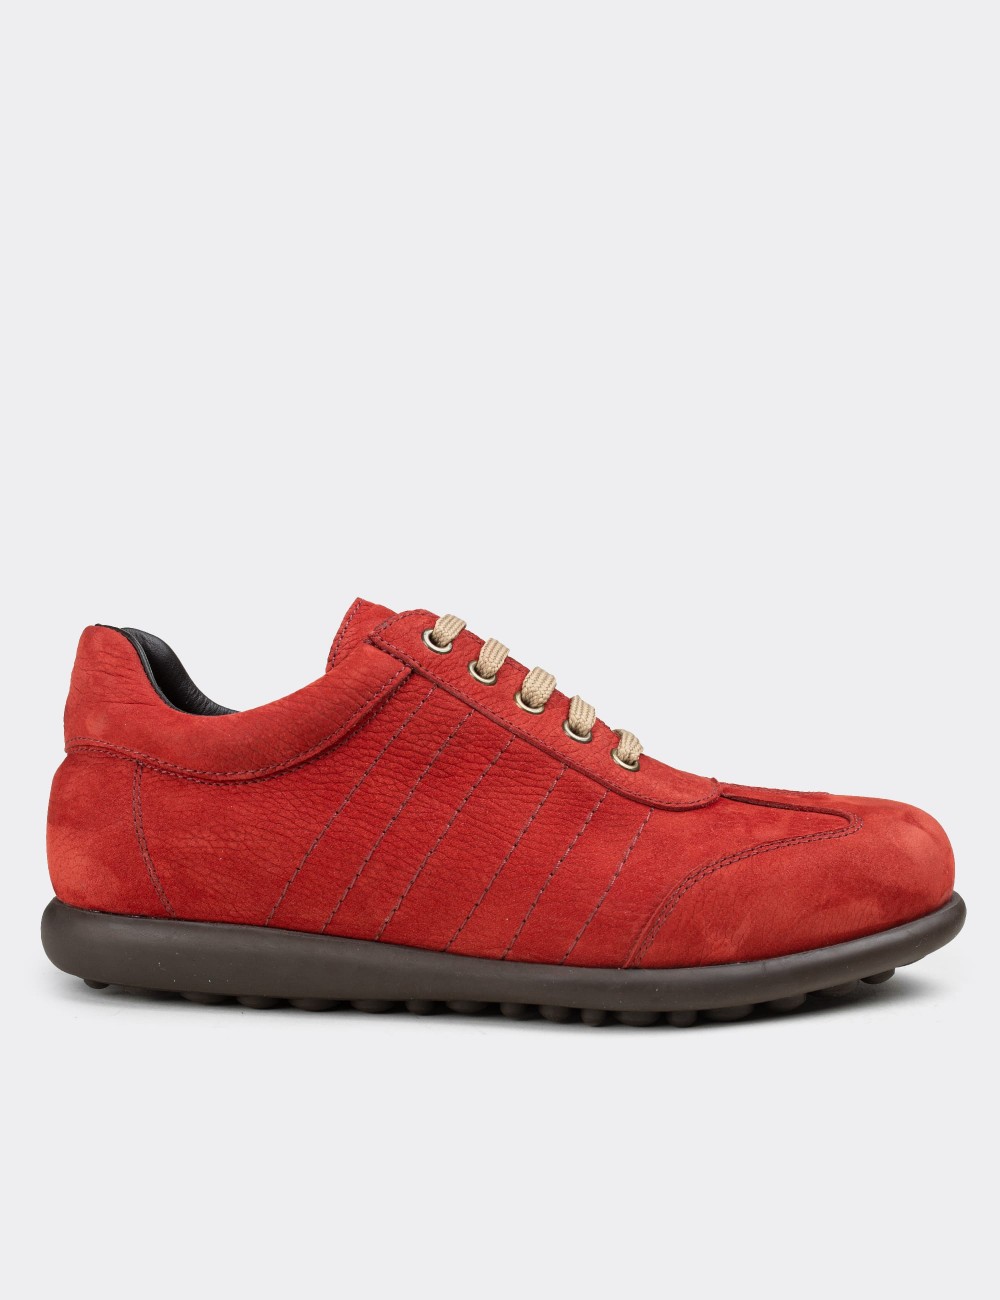 Red Nubuck Leather Lace-up Shoes - 01826MKRMC01